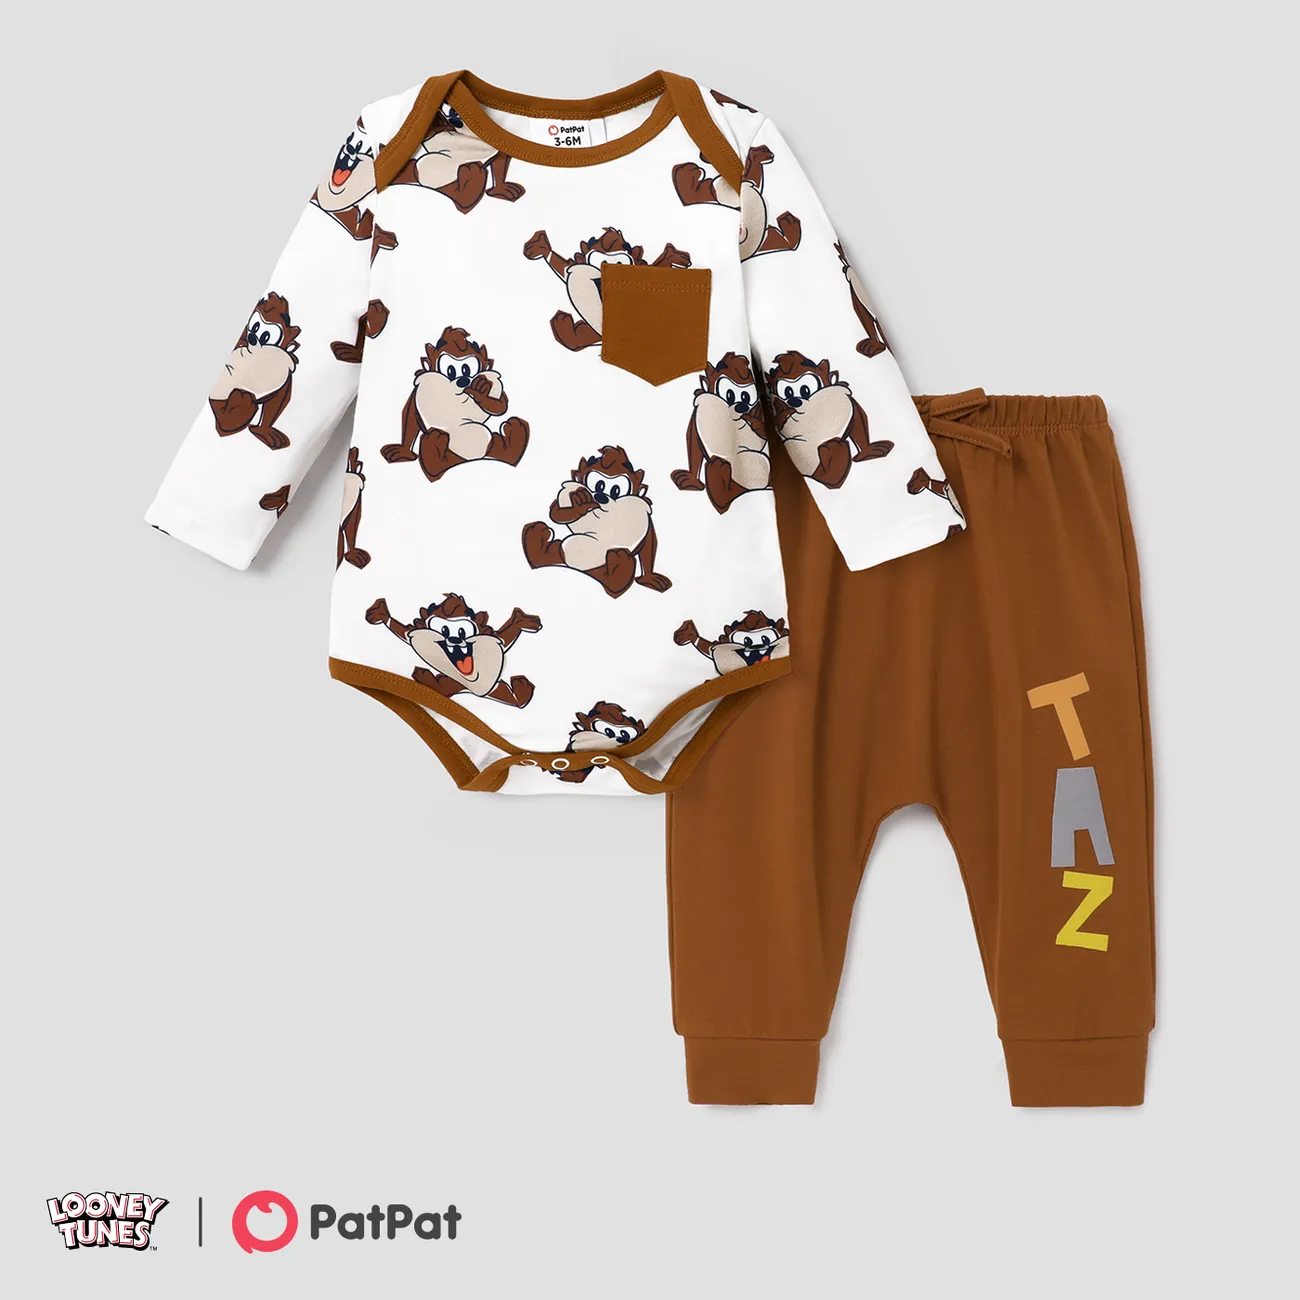 Looney Tunes Baby Boy/Girl Character Print Long-sleeve Bodysuit and Pant Sets  big image 1